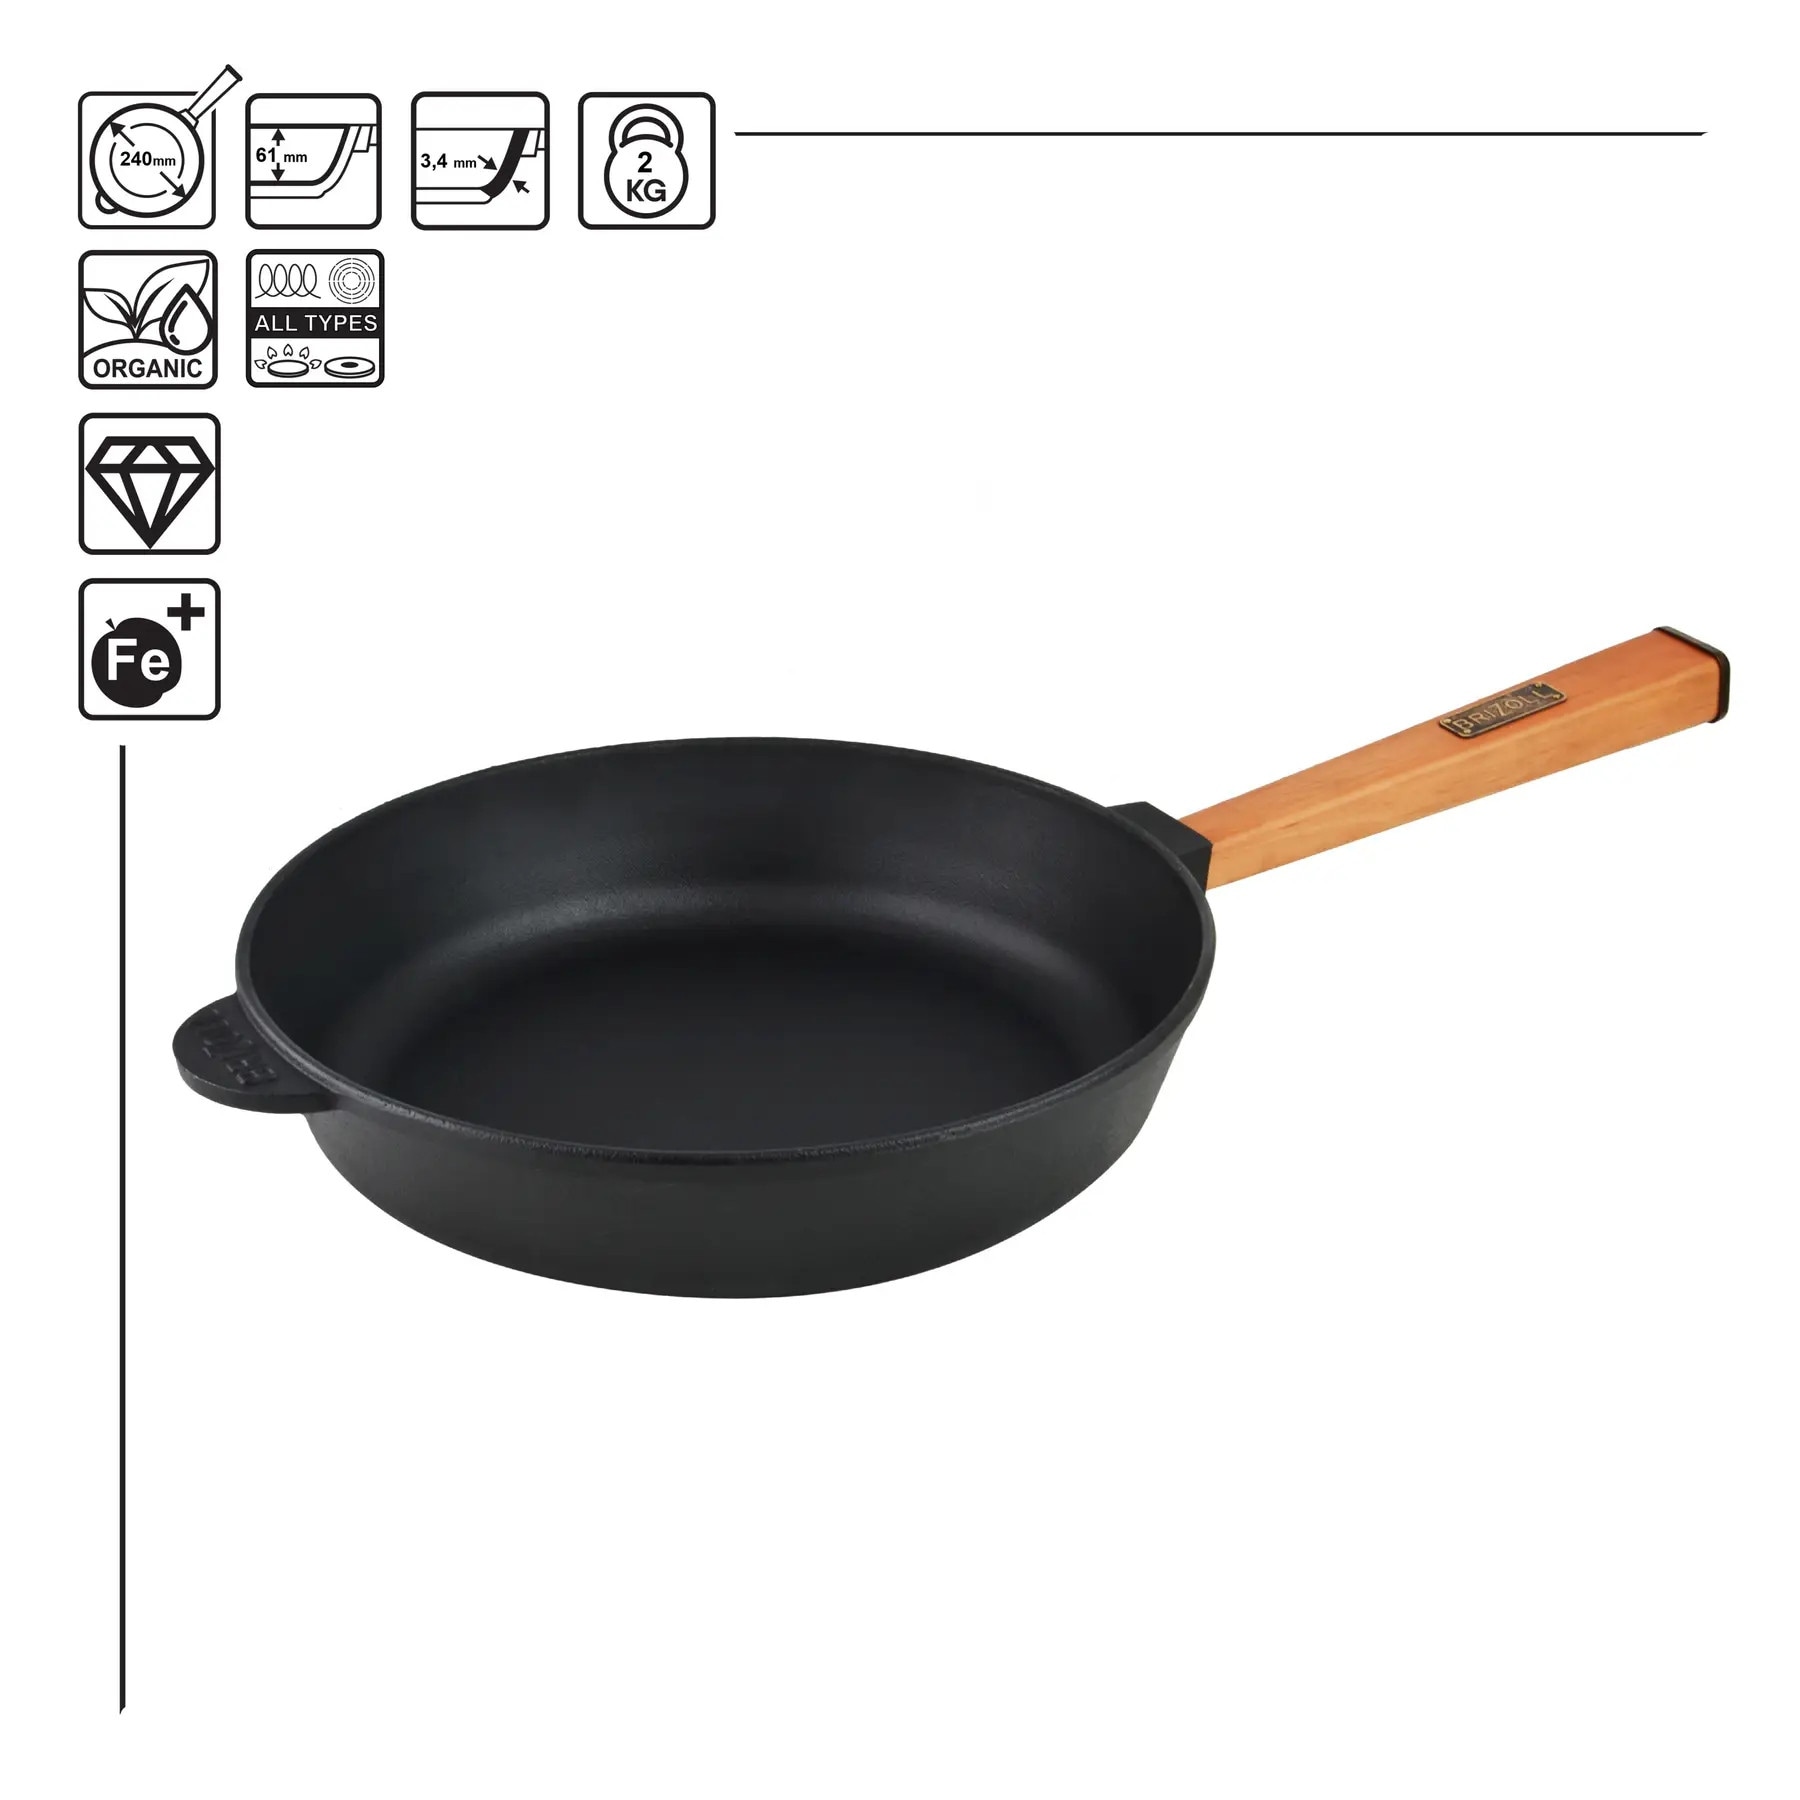 https://ak1.ostkcdn.com/images/products/is/images/direct/d964bf0529a361d33c8a68492d3a2a402d1a931d/Brizoll-Cast-Iron-Deep-Frying-Pan-w--Removable-Handle.jpg